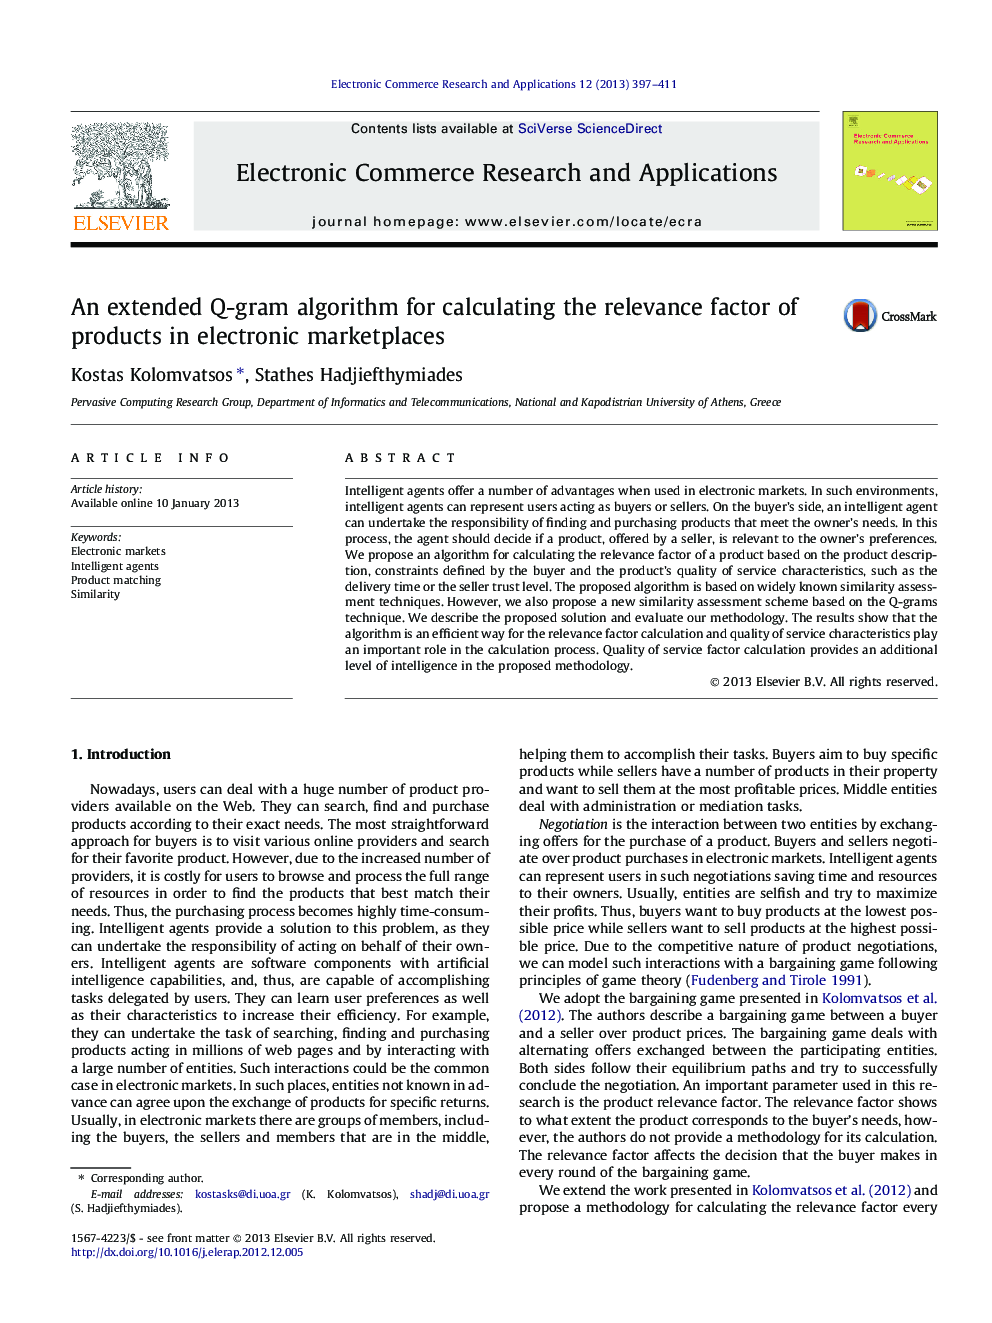 An extended Q-gram algorithm for calculating the relevance factor of products in electronic marketplaces